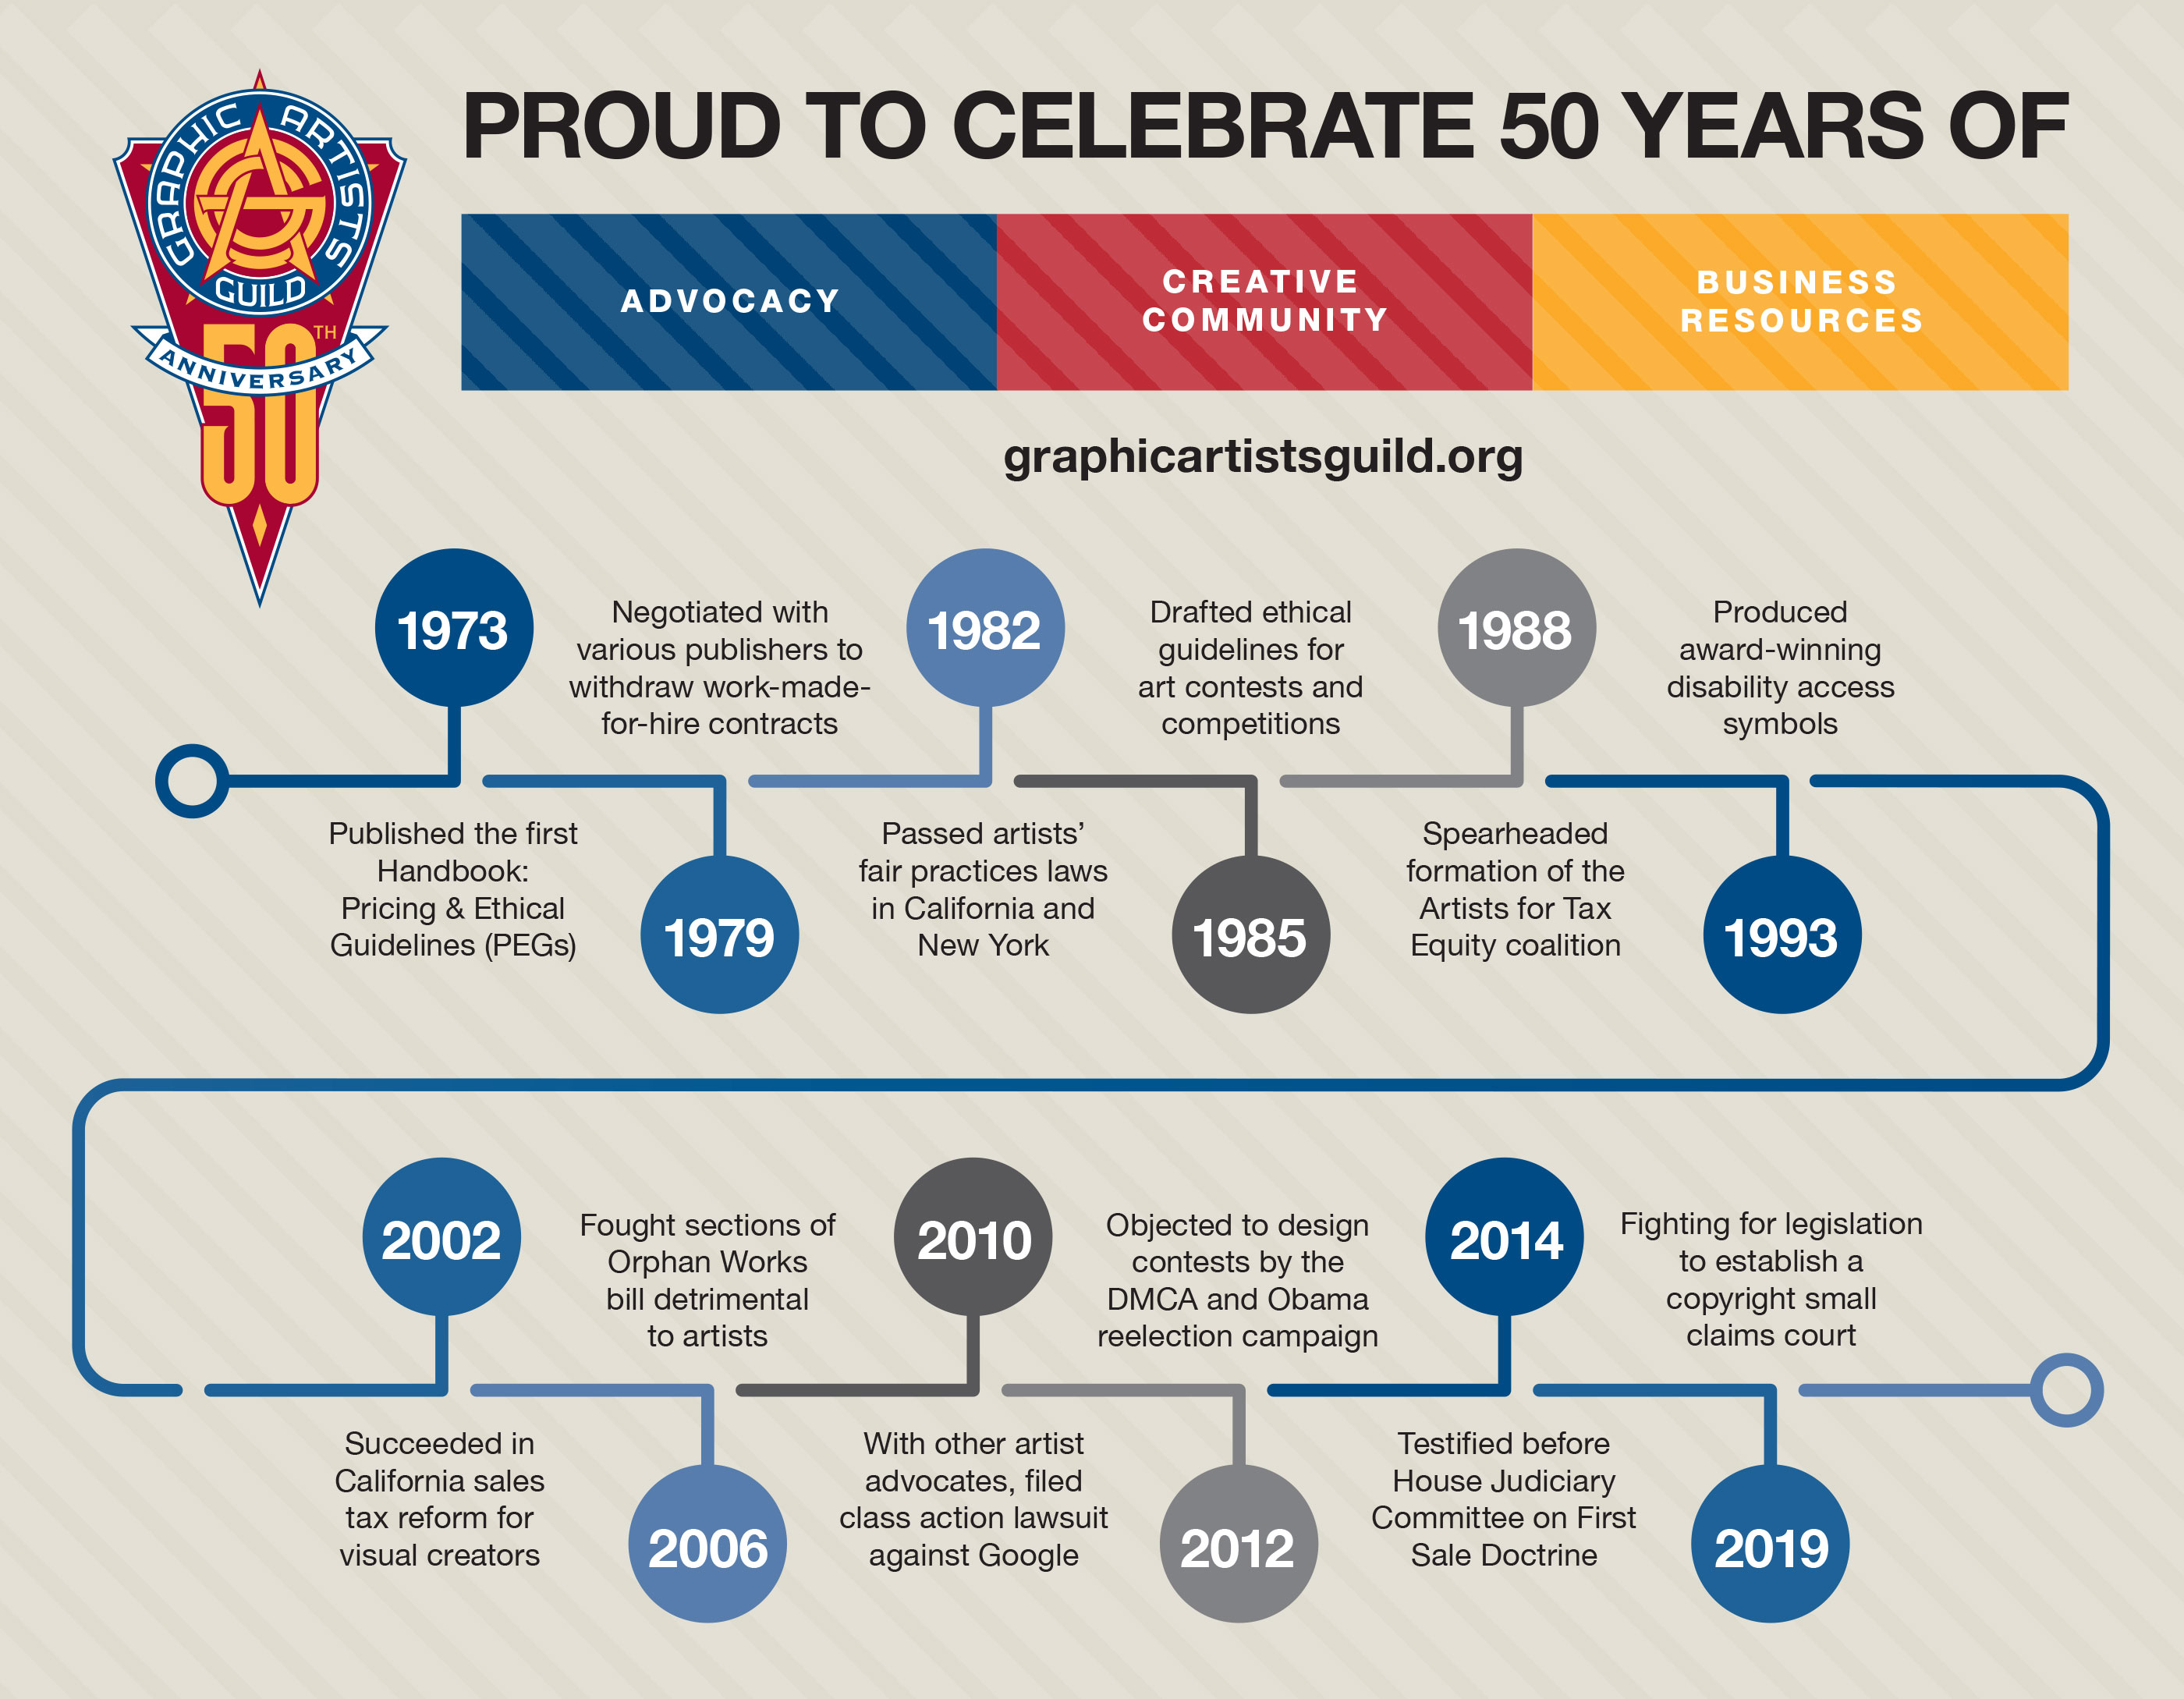 Guild 50th anniversary timeline infographic